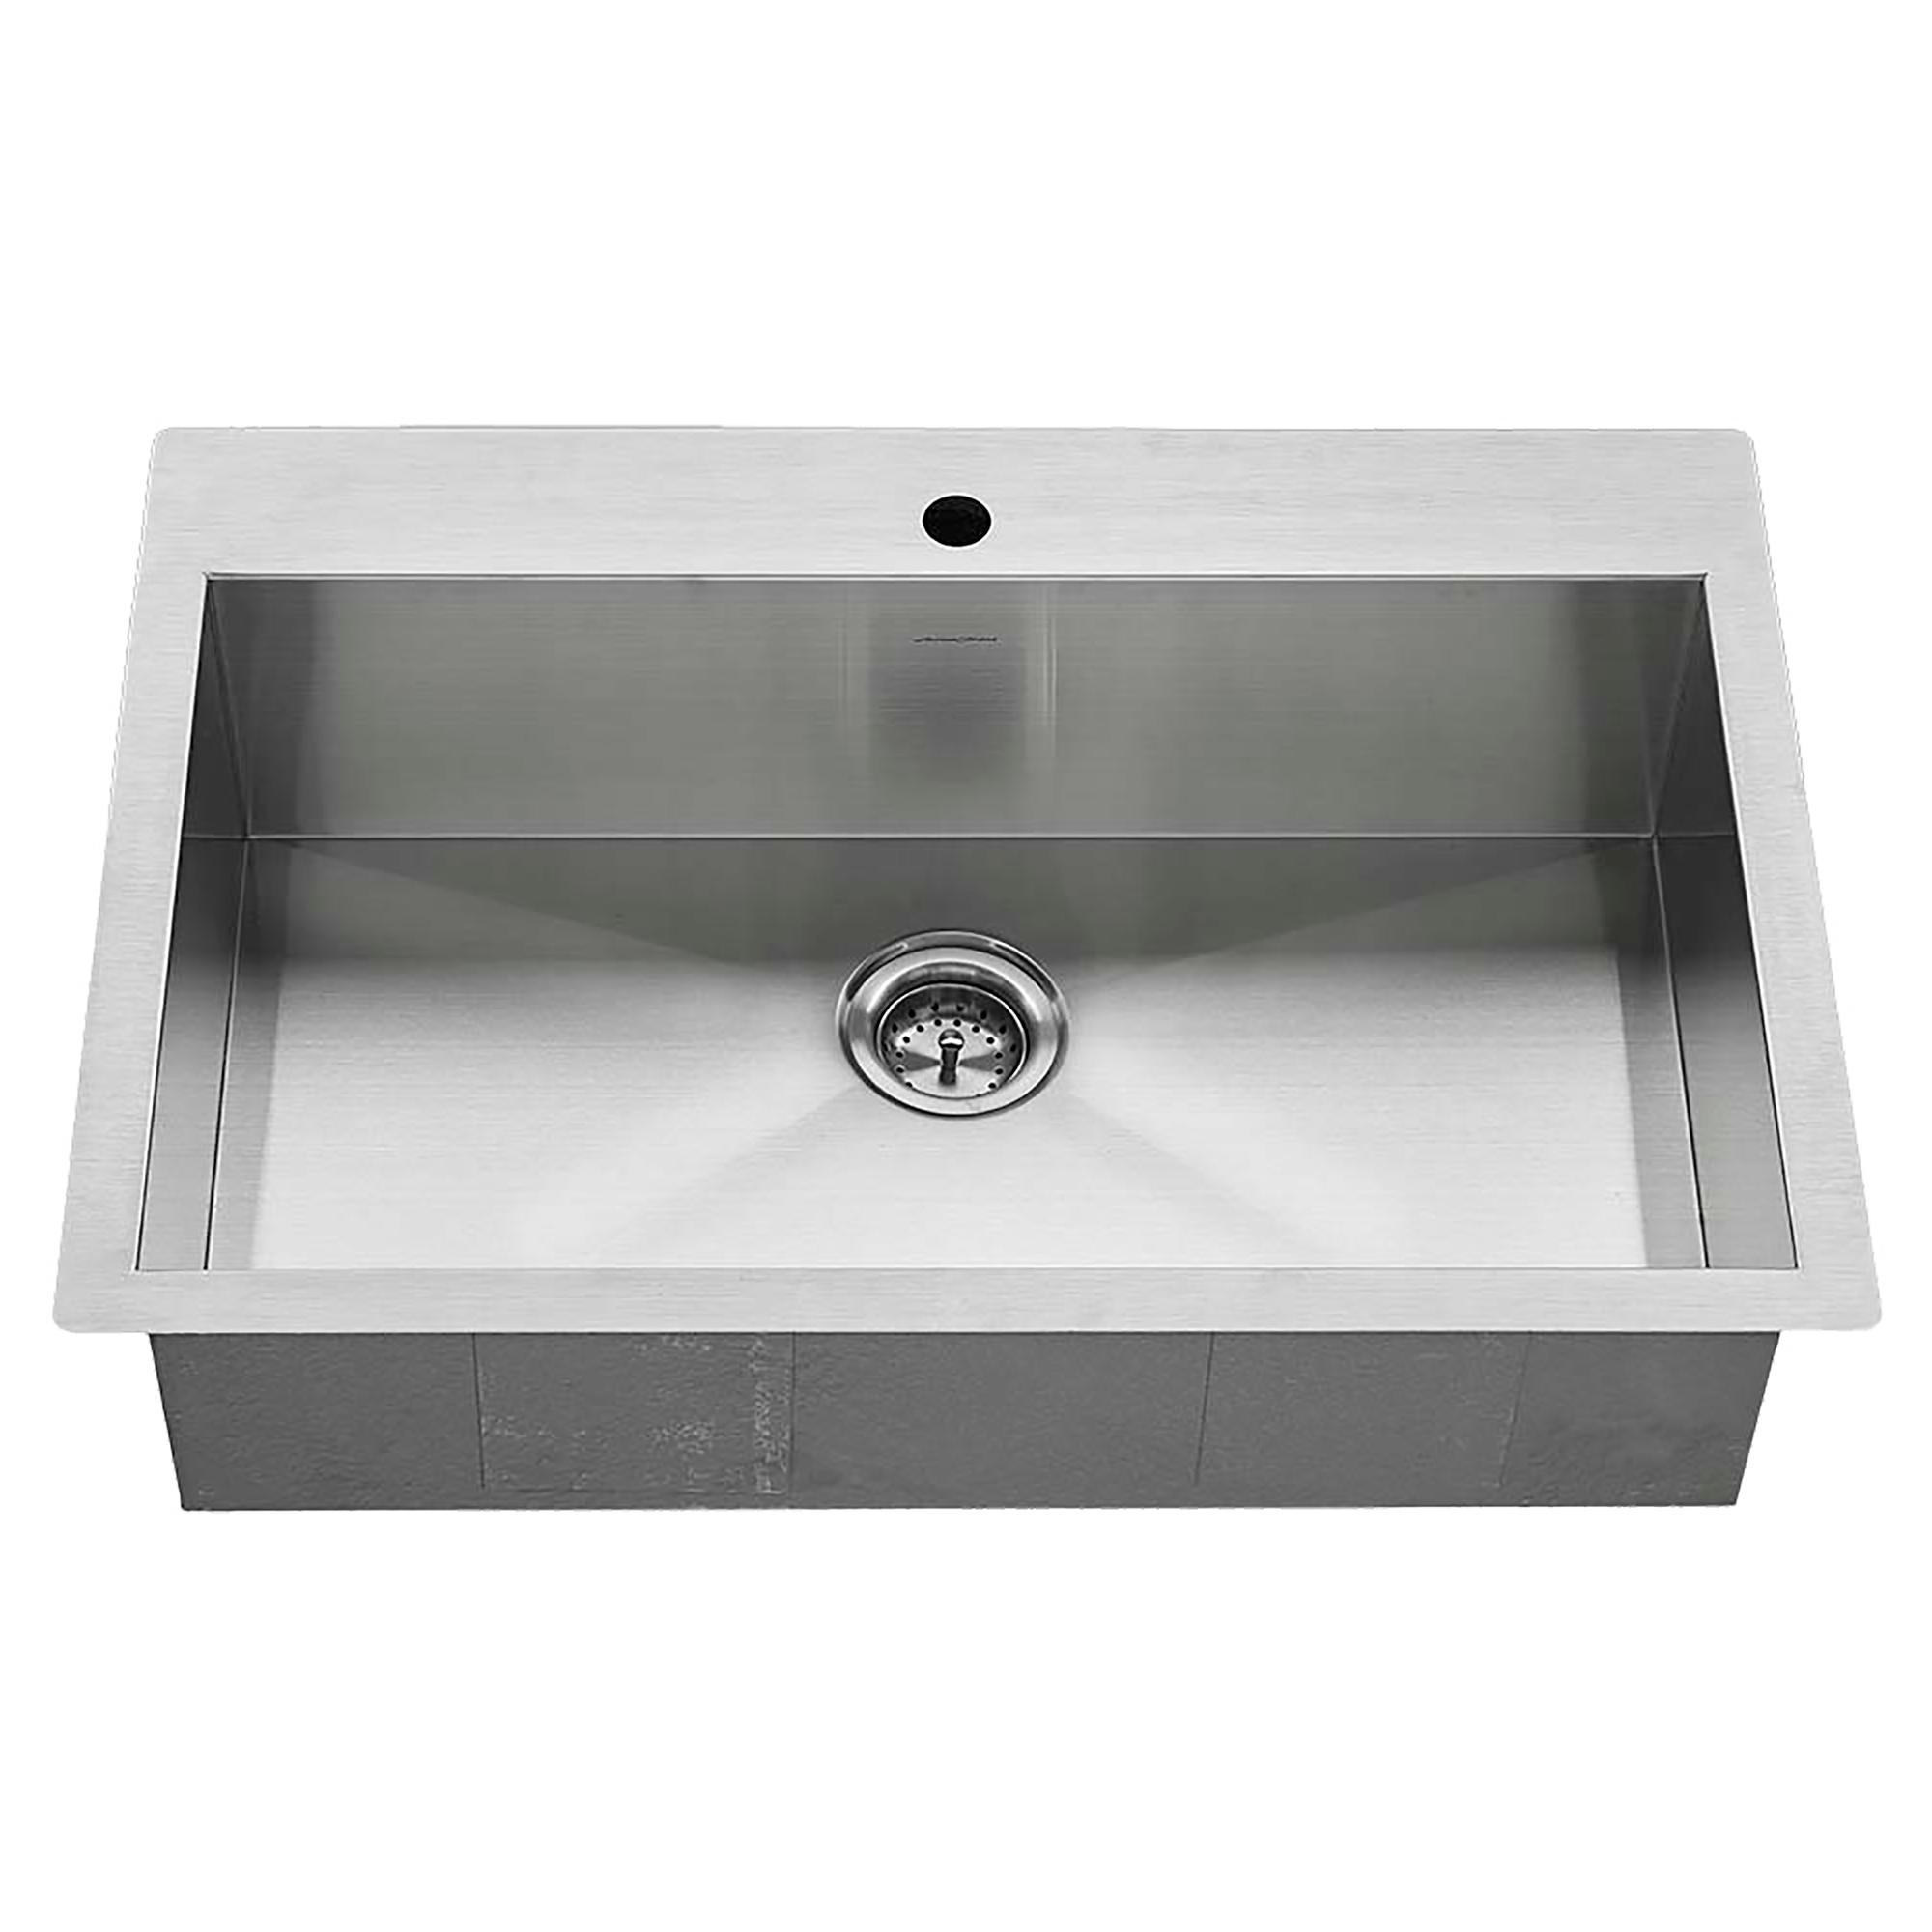 Ideas, Stainless Steel Sinks : Pictures